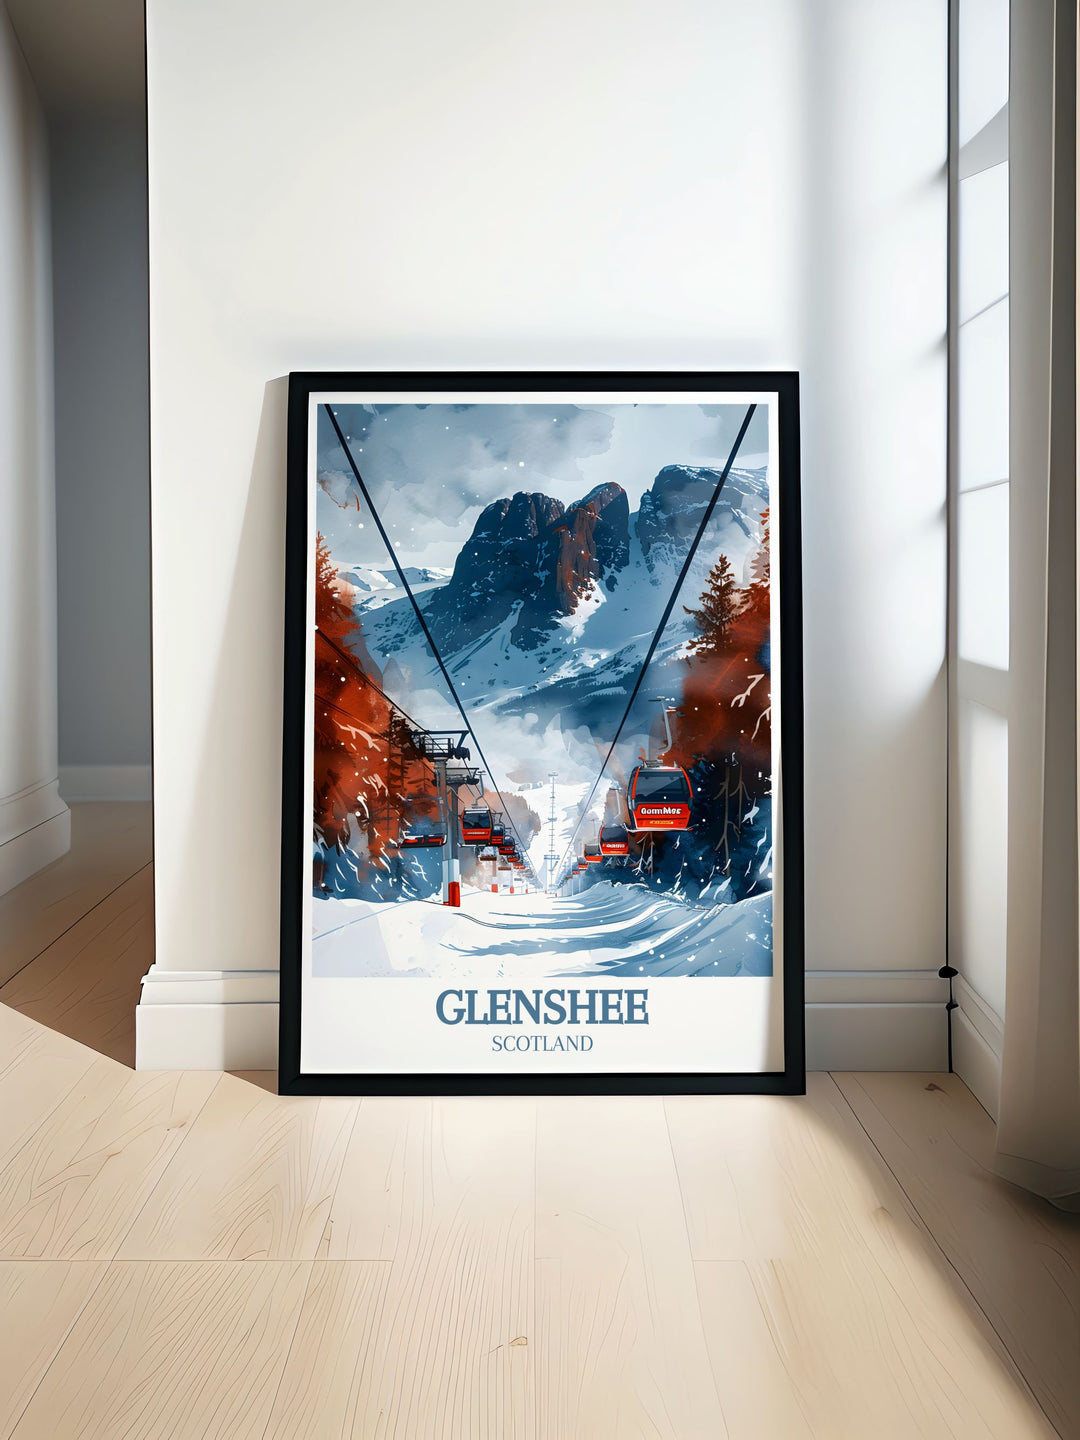 Bringing the excitement of skiing at Glenshee into your living space, this poster features the resorts extensive network of ski runs and vibrant winter scenery. Ideal for ski enthusiasts, this artwork captures the thrill of the Scottish slopes.